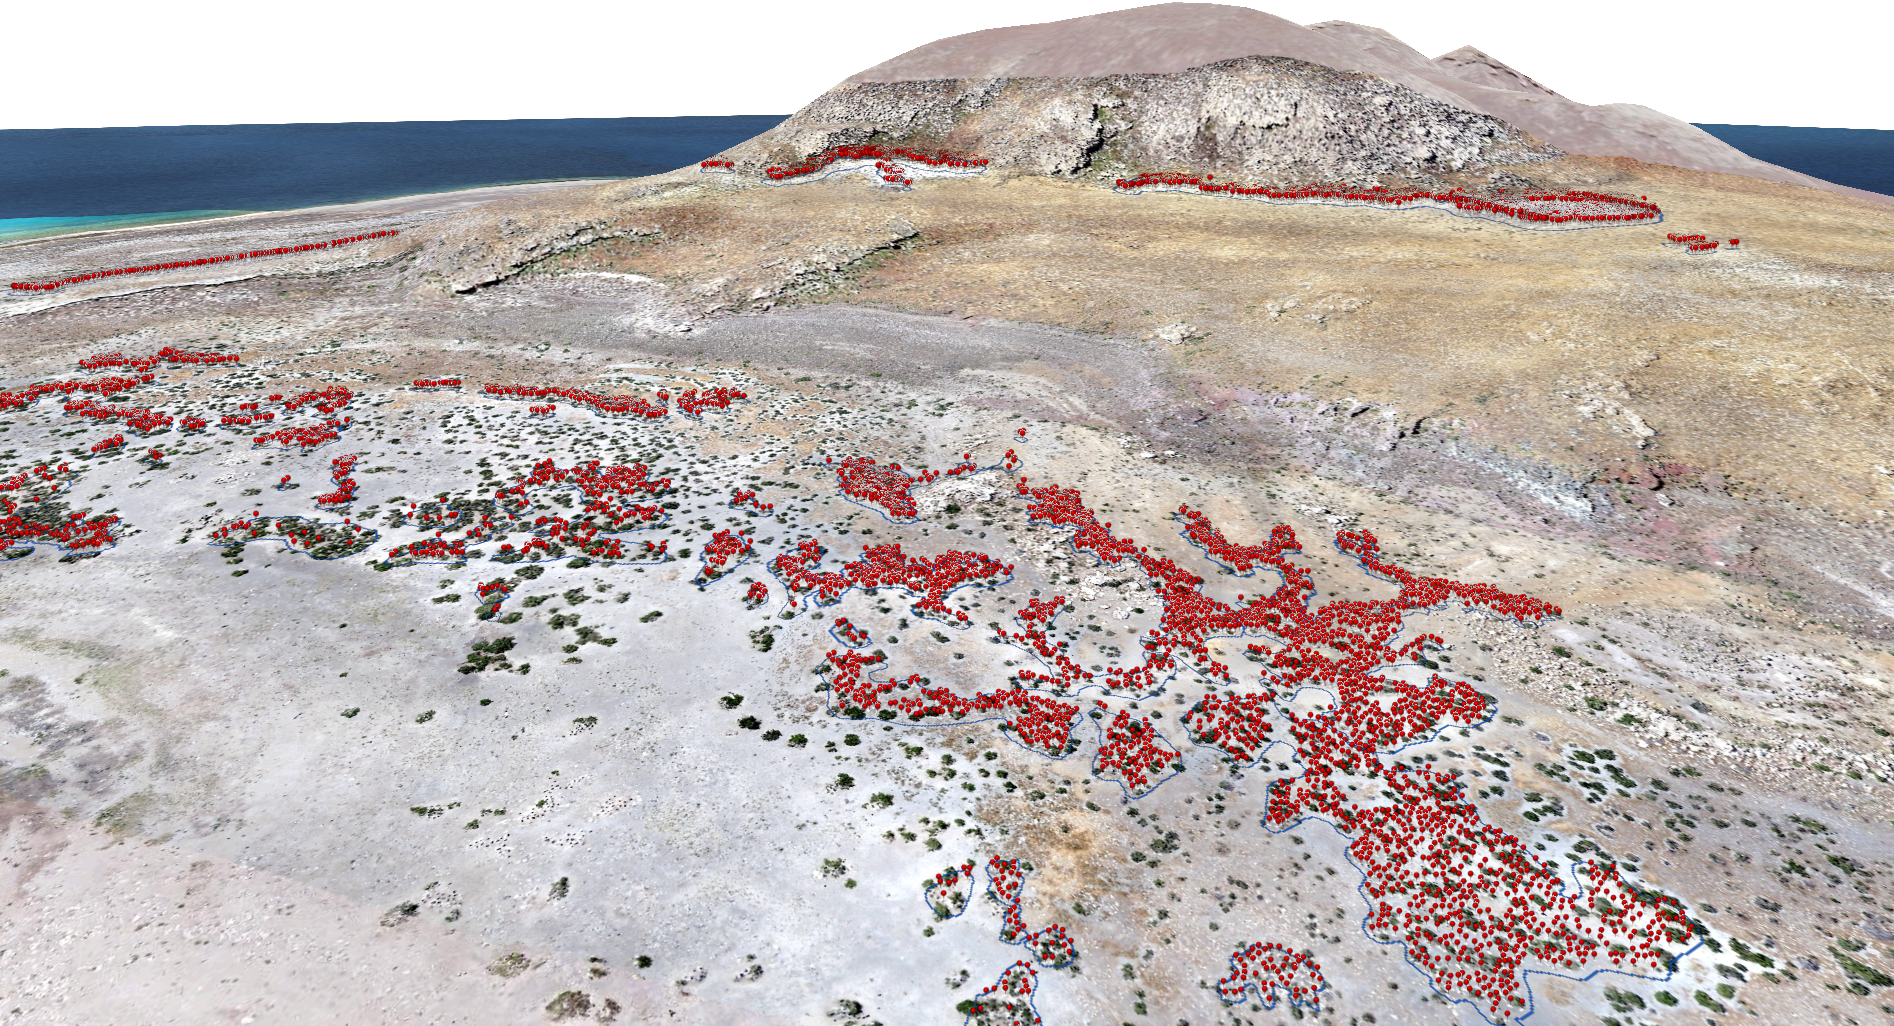 Natural color imagery collected via the RQ-11A Raven UAS platform. Three-dimensional models created from the individual images captured by the UAS. Red pins mark individual American pelicans on the island.